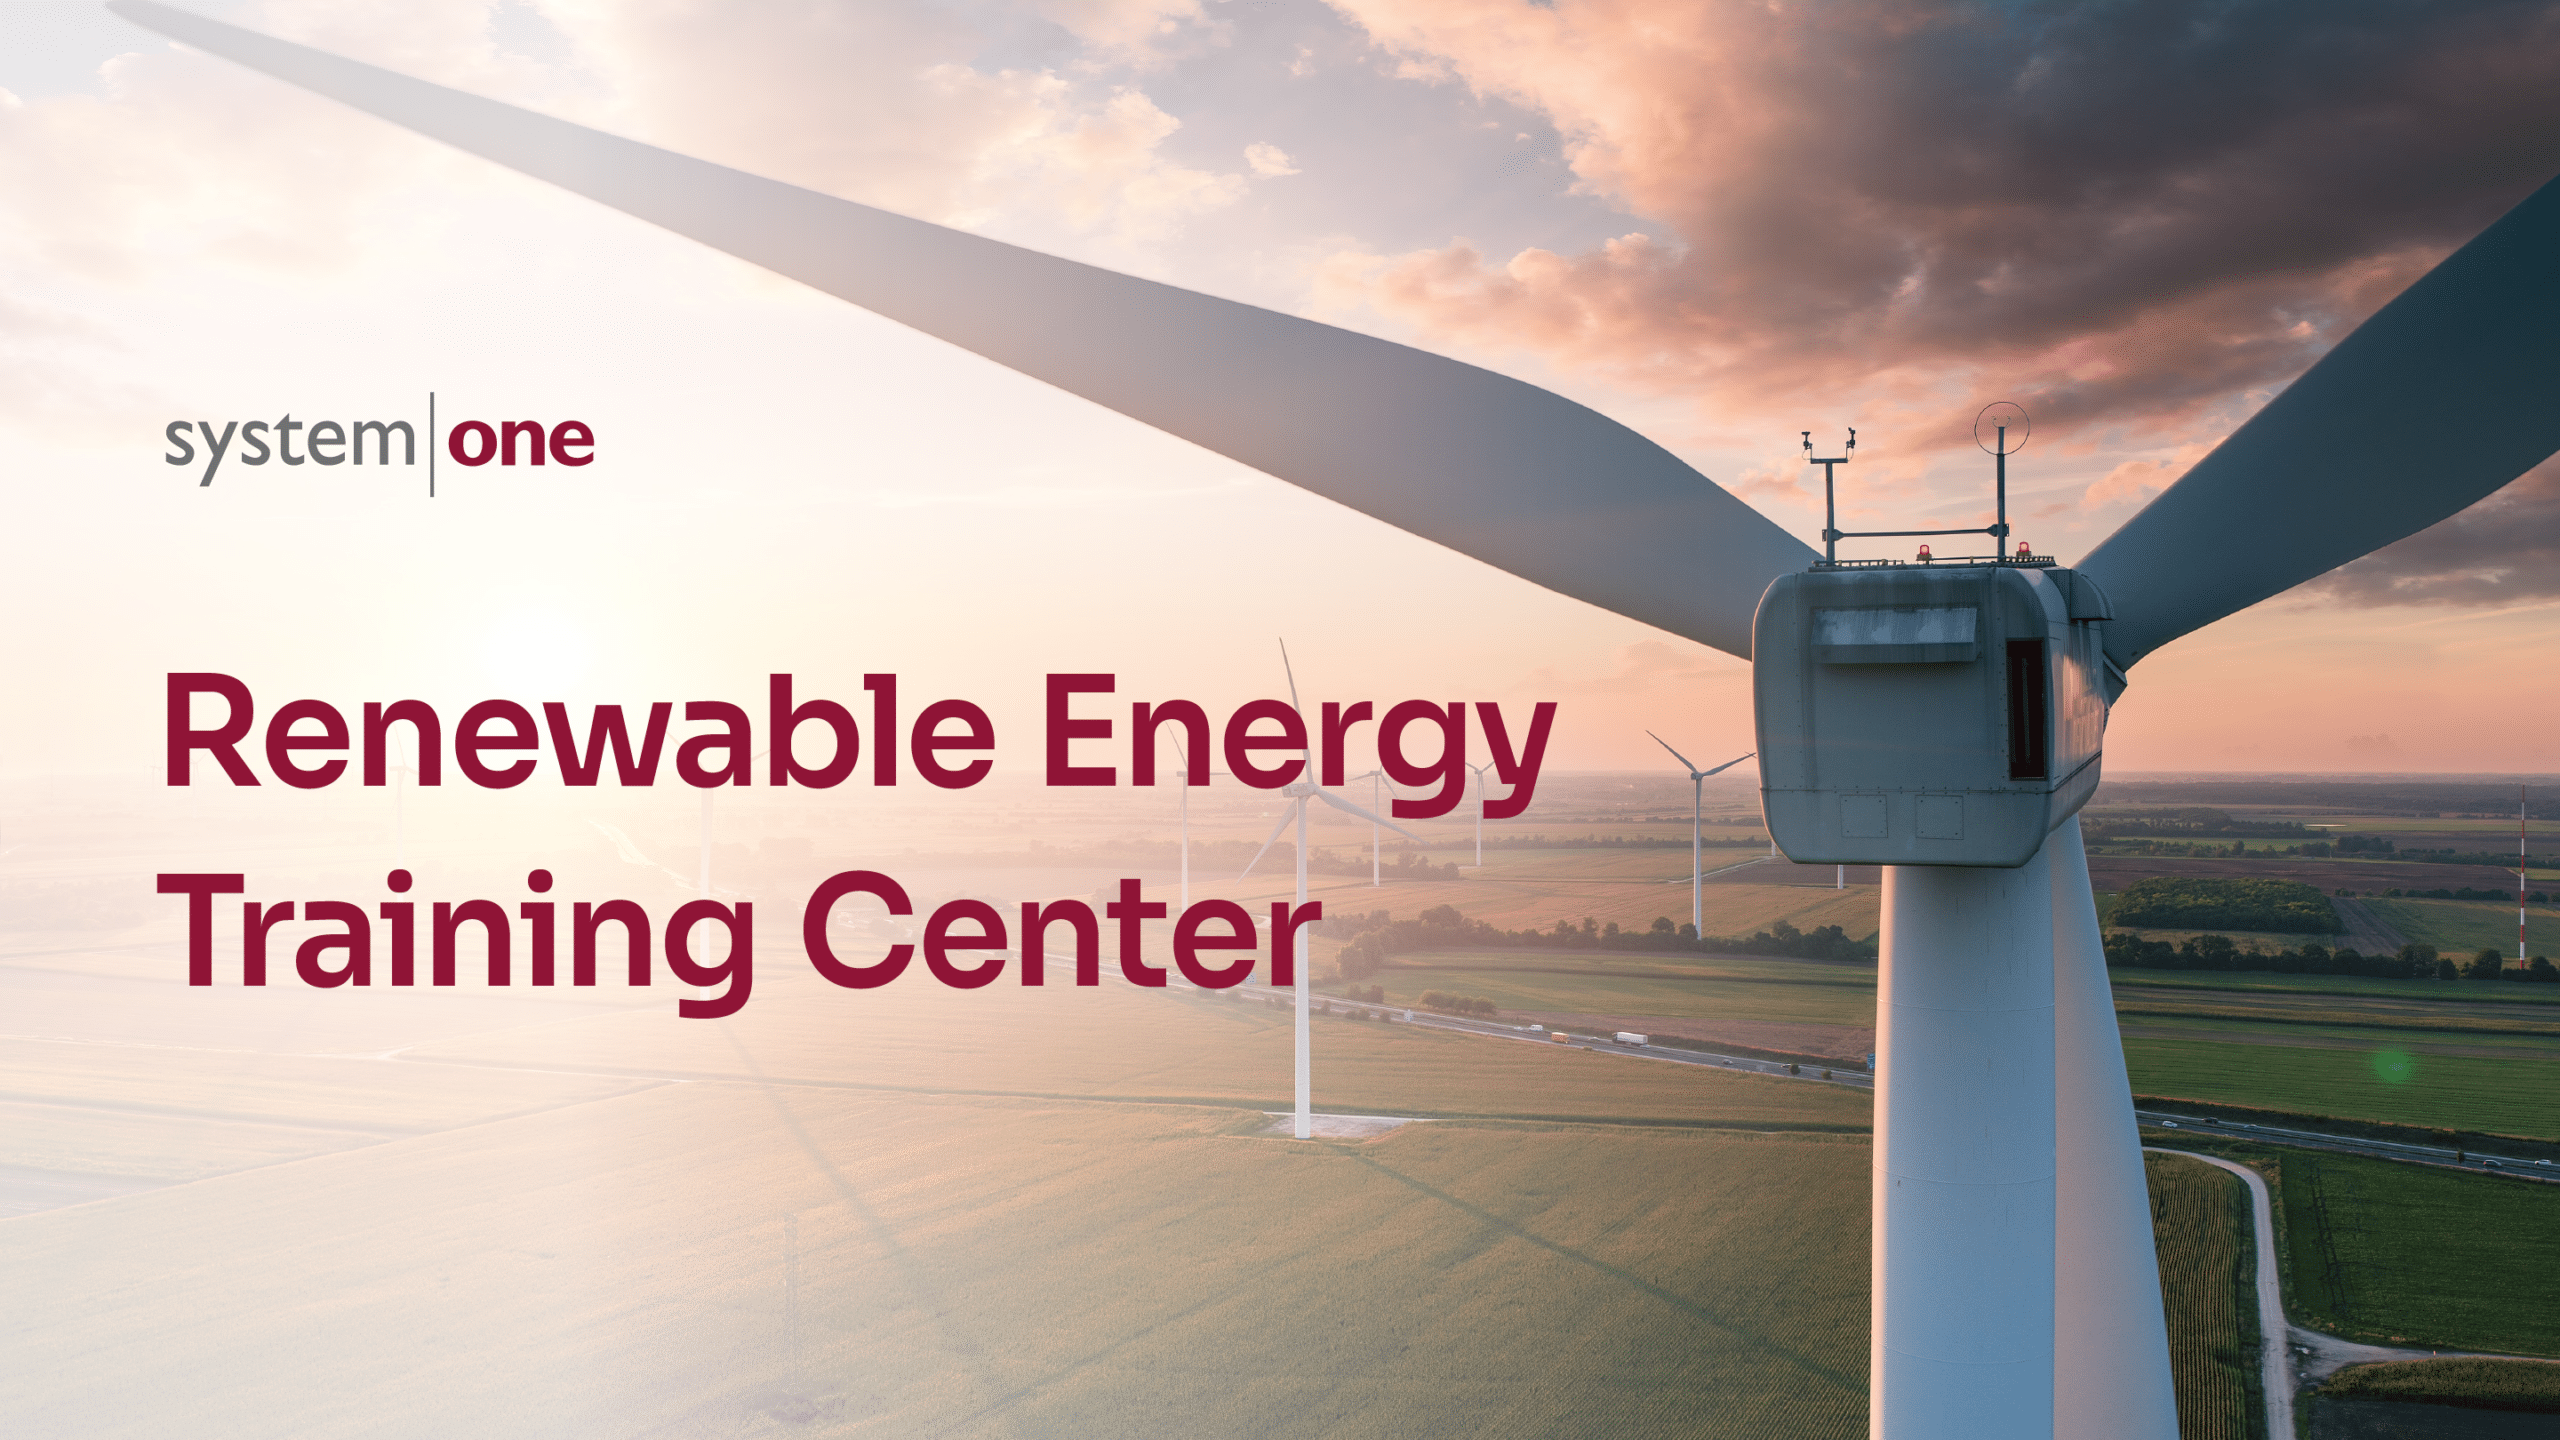 The System One Renewable Energy Training Center (RETC) addresses a critical need for high-quality, accessible renewable energy training to support wind turbine operations and other related renewable energy skills.